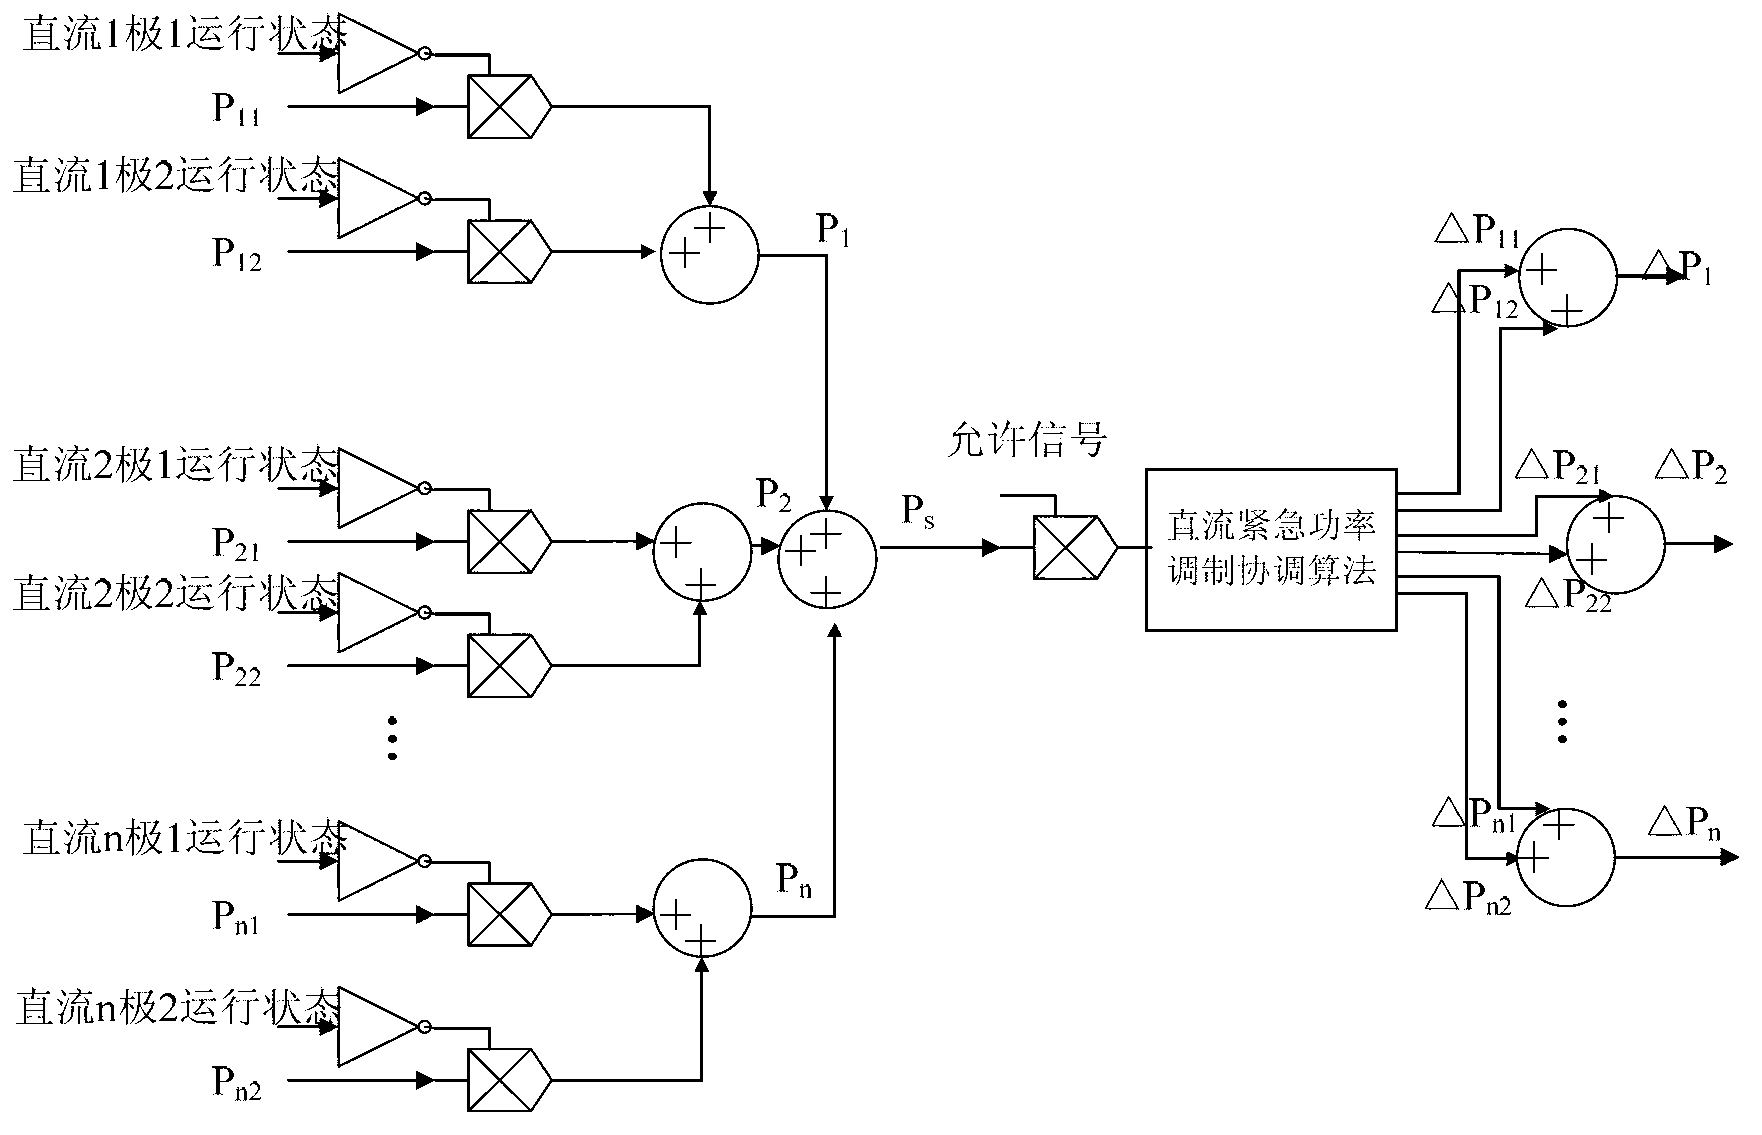 Multi-loop direct-current emergency power modulation system and method based on PMU (power management unit)